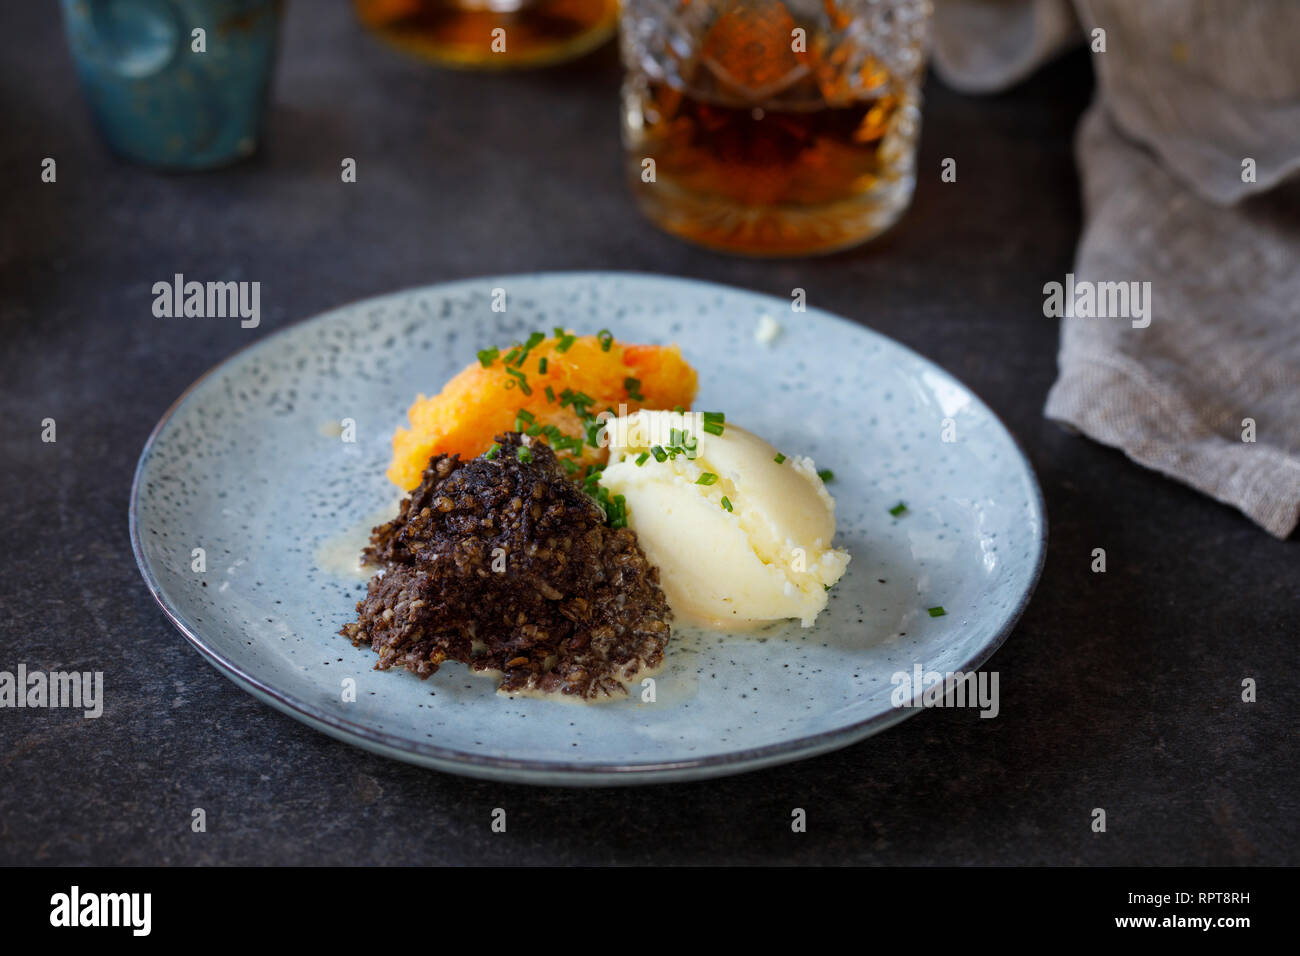 Scottish dish of haggis, neeps and tatties, meal served traditionaly on Burns night Stock Photo